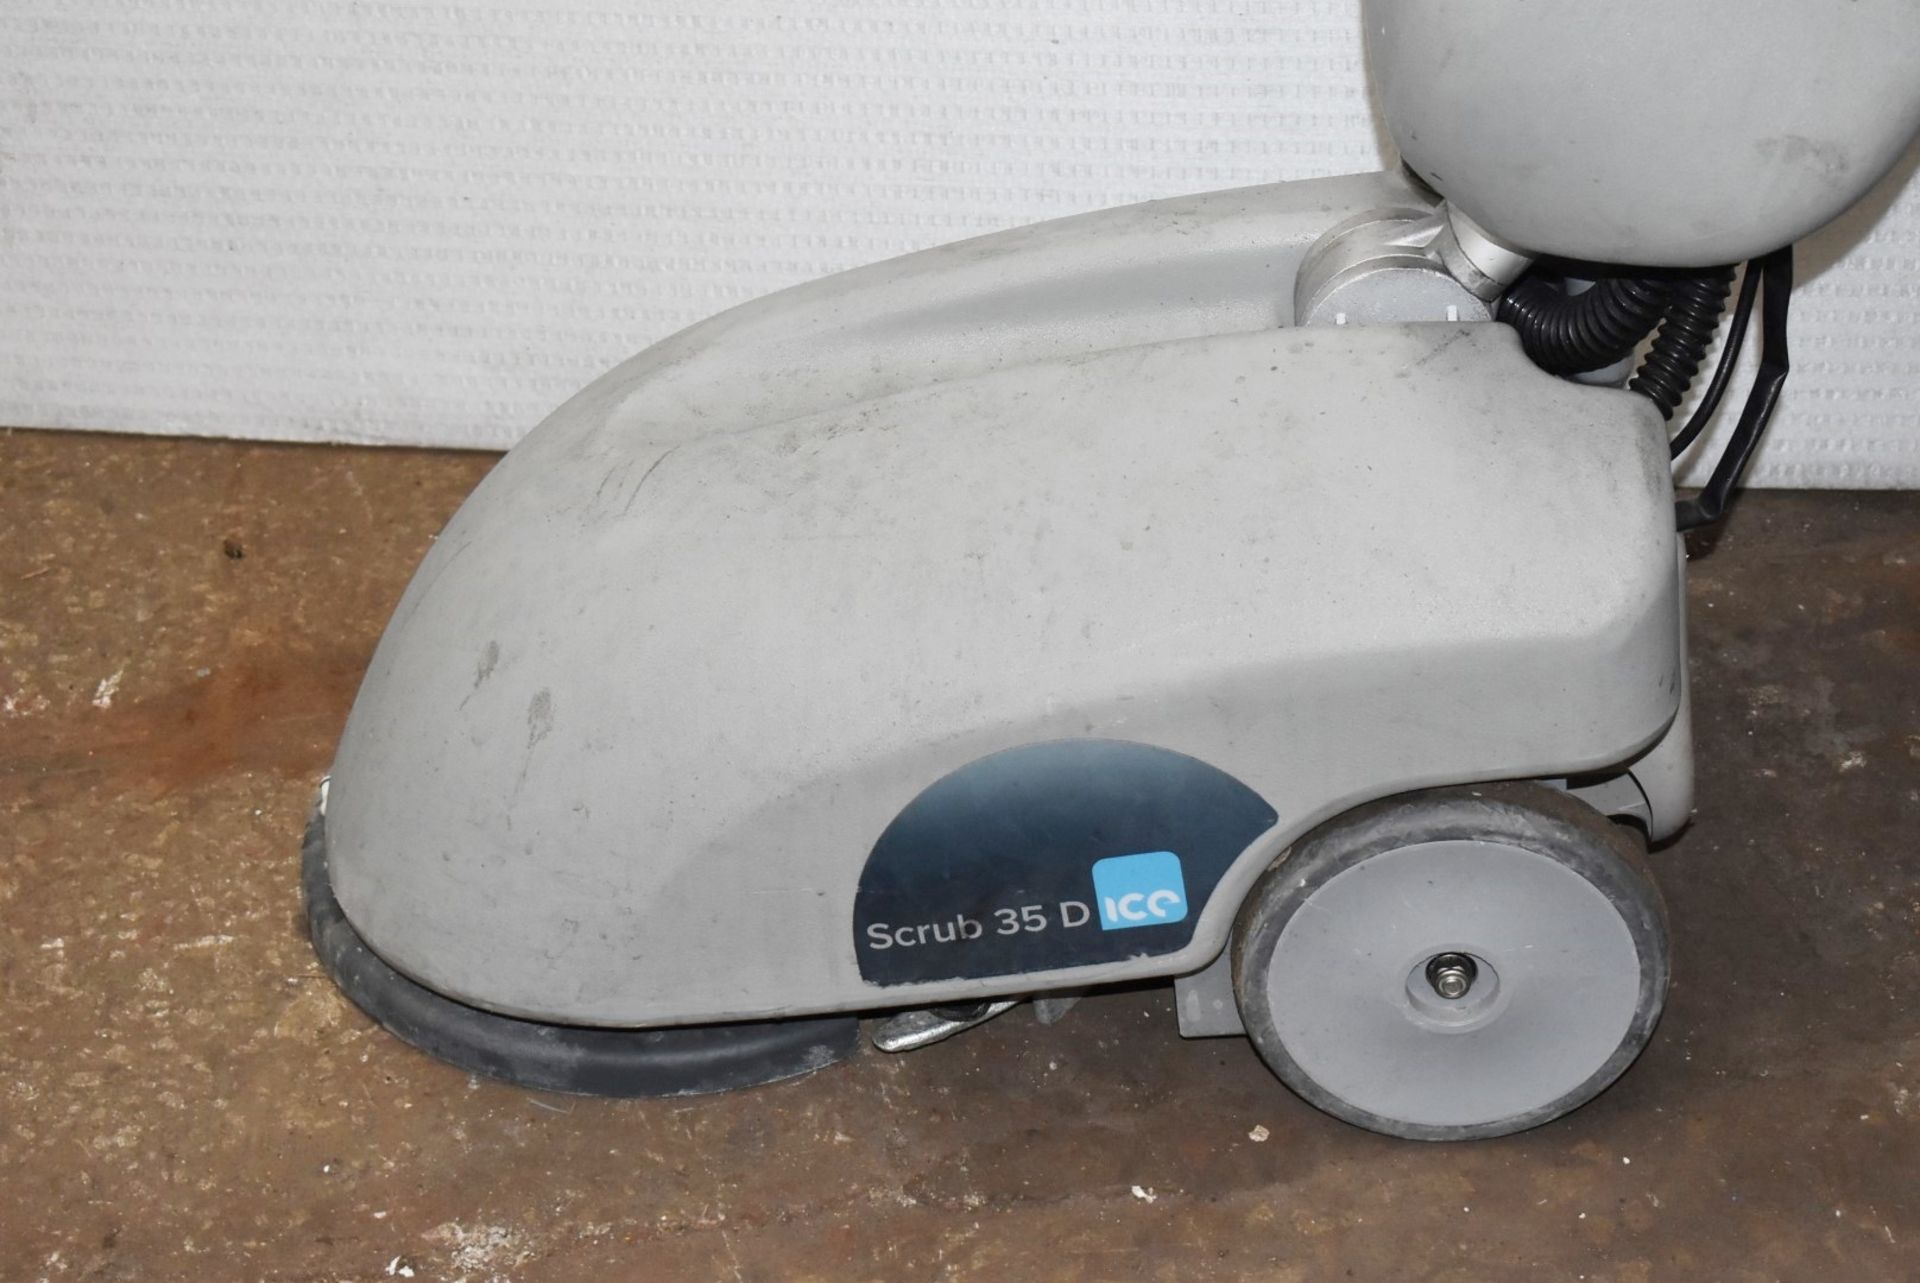 1 x Ice Scrub 35D Compact Floor Scrubber - Recently Removed From a Supermarket Environment Due to - Image 7 of 15